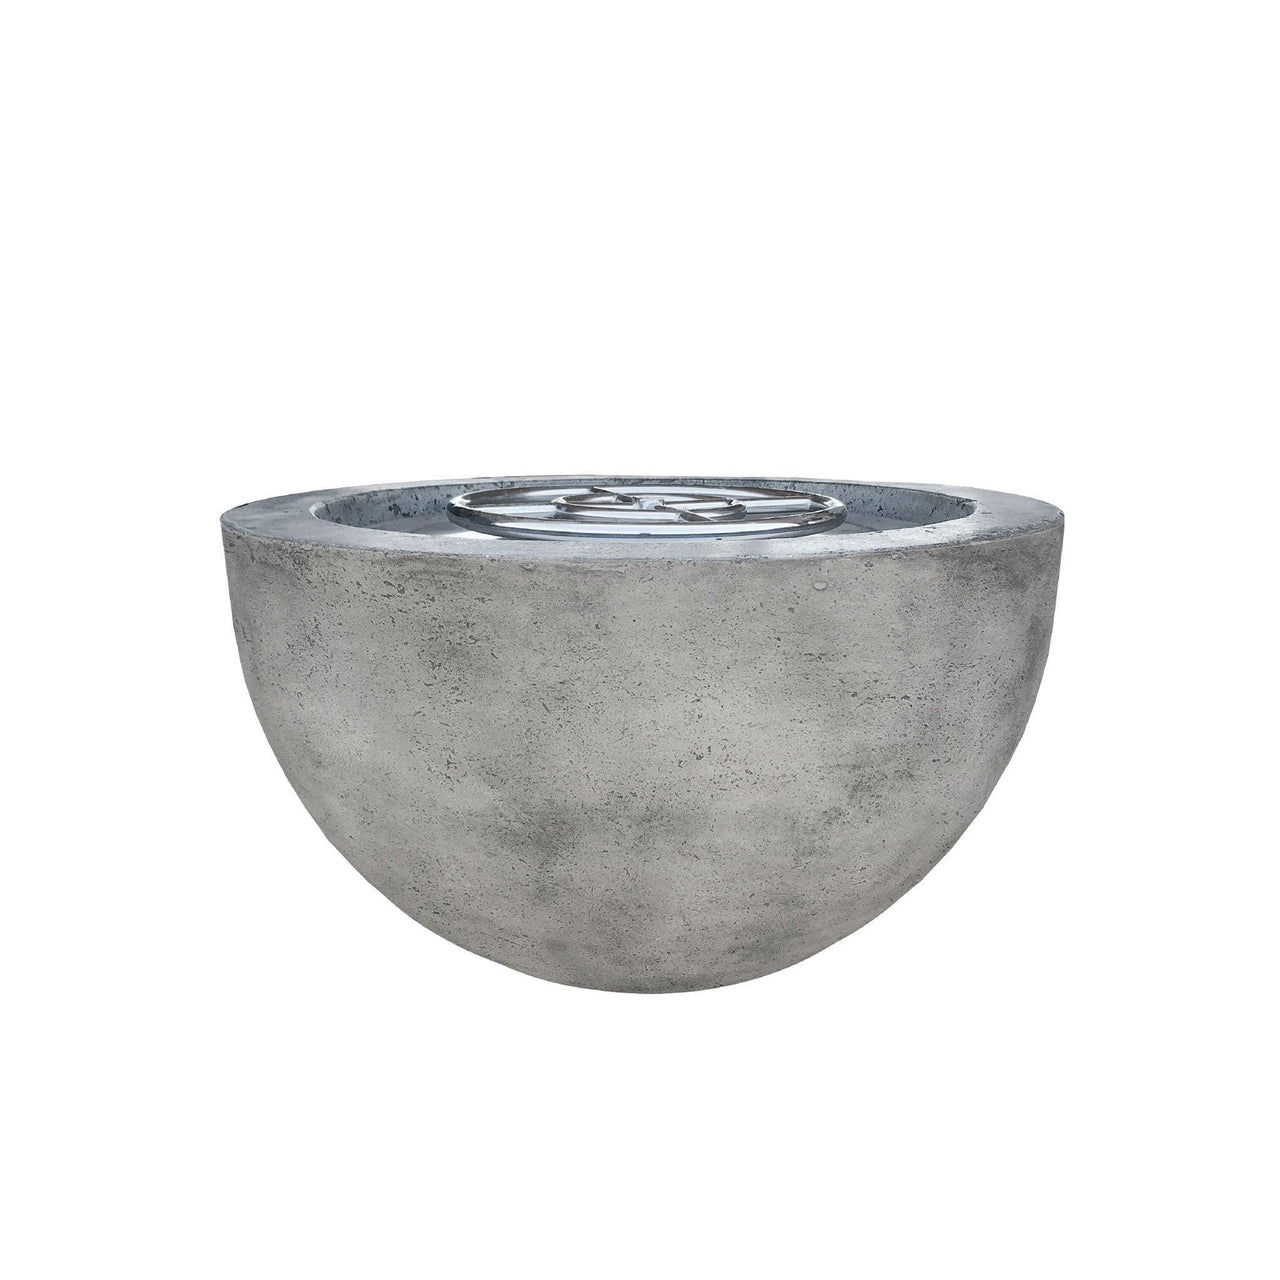 Prism Hardscapes - Moderno Series 3 Round Concrete Fire Bowl - Fire Pit Stock